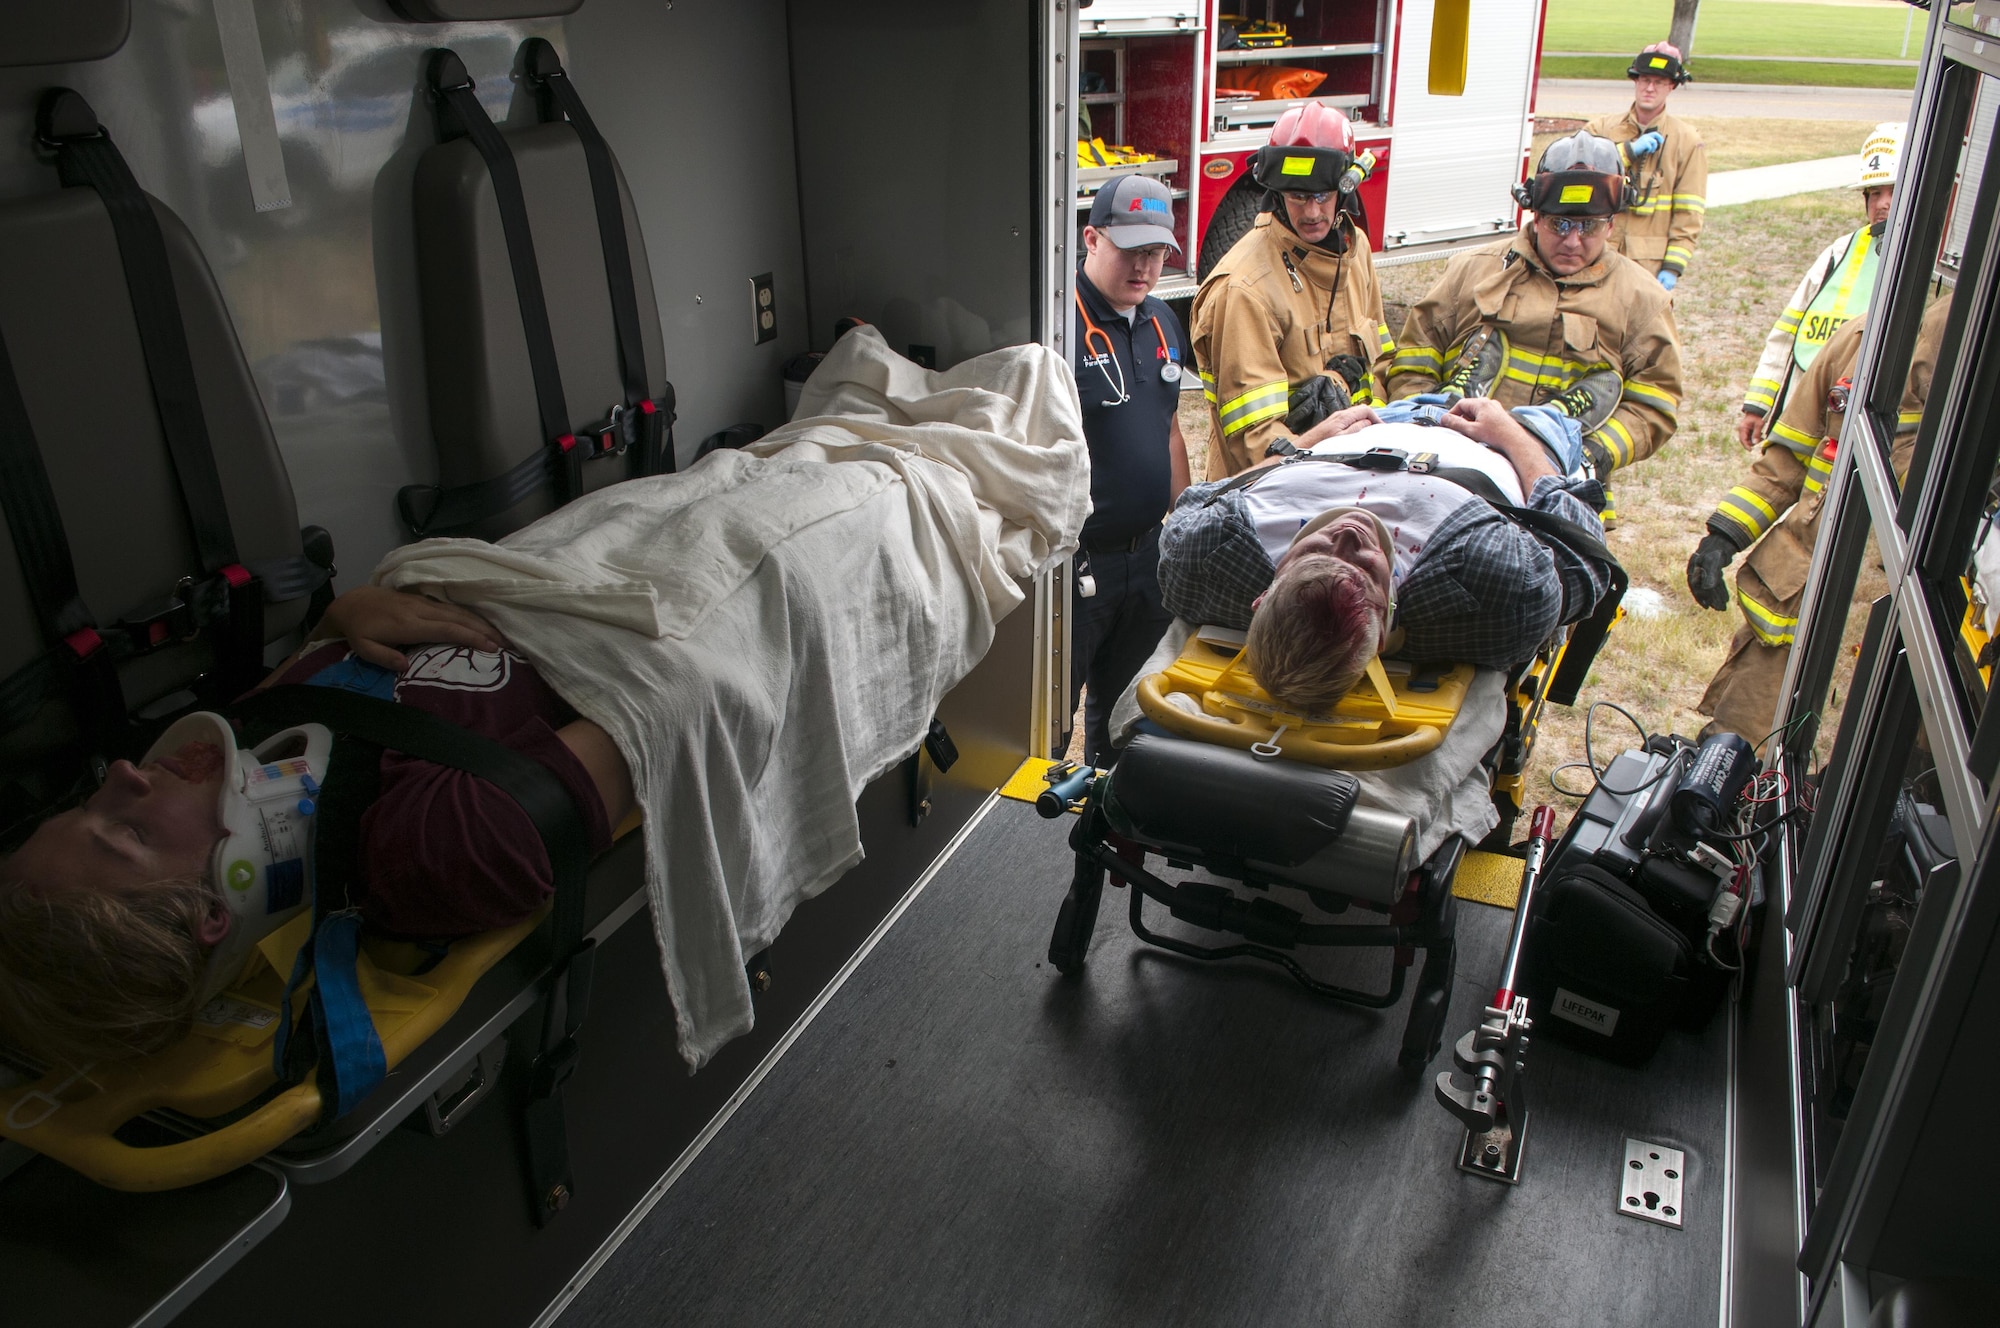 First responders secure Master Sgt. Josh Wilson, 90th Civil Engineering Squadron assistant fire chief, and Airman 1st Class Piper Whetstone, a 90th CES firefighter, inside of an ambulance during a drinking and driving awareness event at F.E. Warren Air Force Base, Wyo., June 30, 2016. The scenario involved multiple emergency response resources from security forces, firefighters and paramedics demonstrating what is done at the crash site. More than 200 Airman from the 90th Missile Wing attended the event to witness firsthand the devastating effects of a DUI. The DUI scenario concludes with personal speeches from those affected by the crash, the drunk driver, the spouse of the victim killed, and lastly with an obituary read by the base chaplain. (U.S. Air Force photo by Airman 1st Class Malcolm Mayfield)